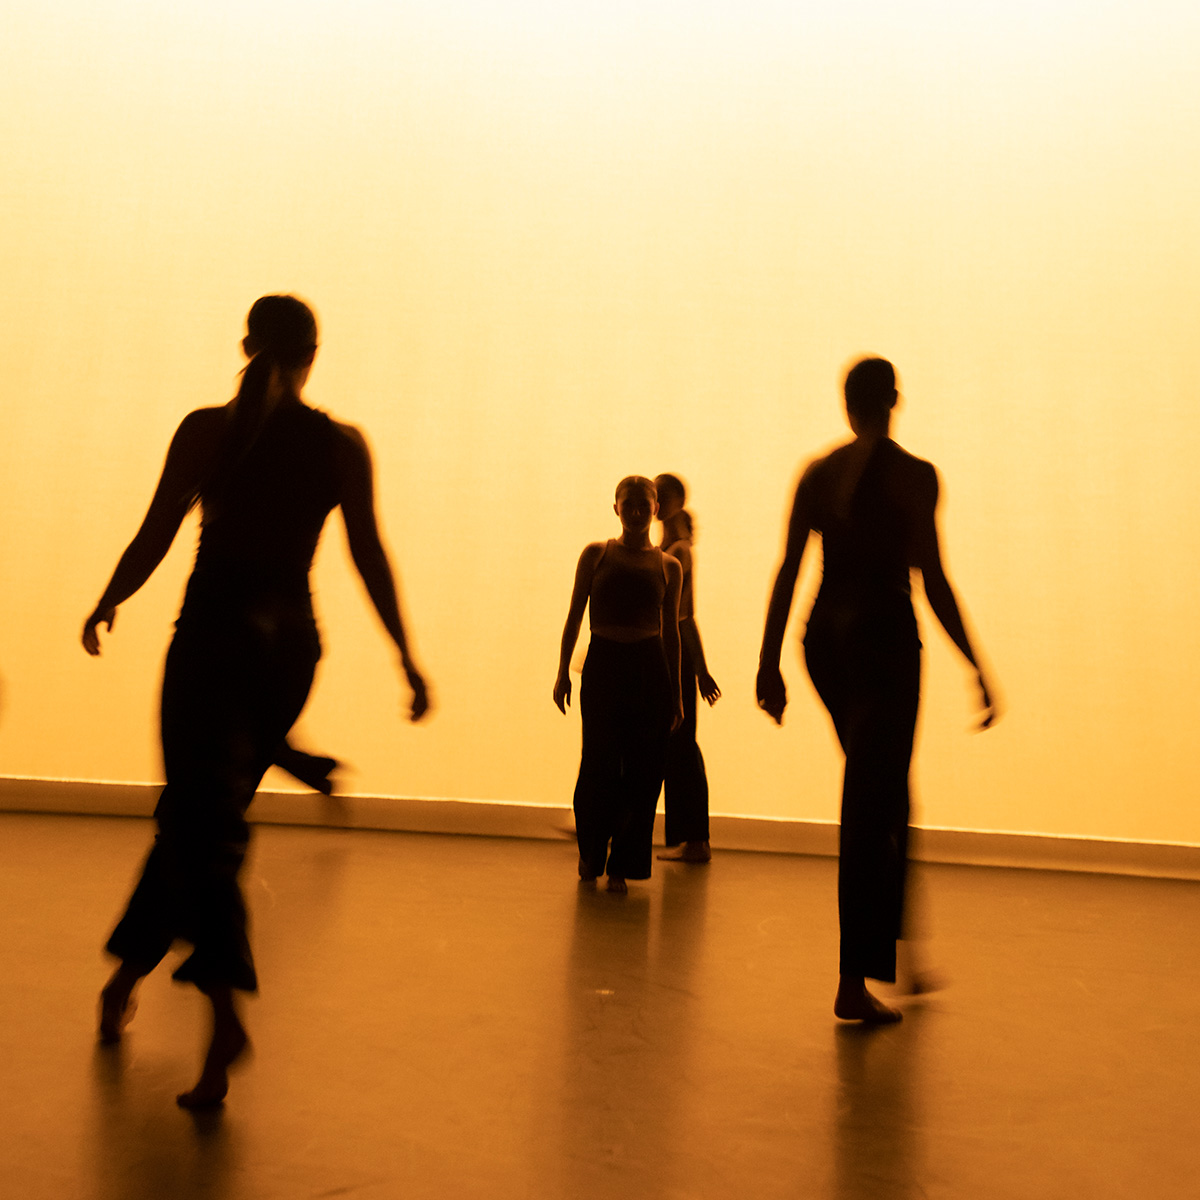 Dancer silhouettes in movement against a yellow lighted backdrop